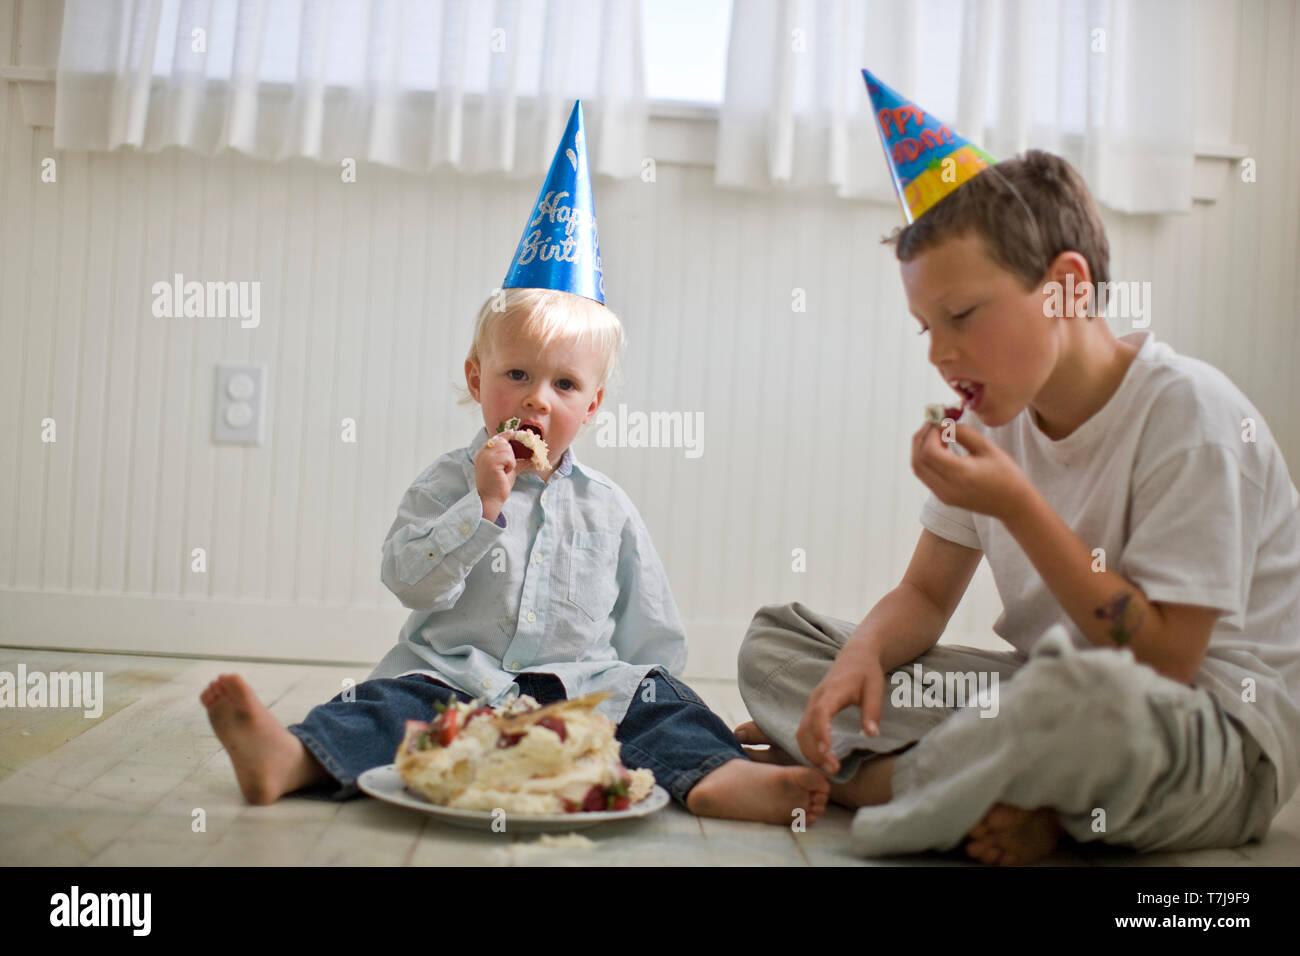 Two young boys eating a cake that has been squashed Stock Photo